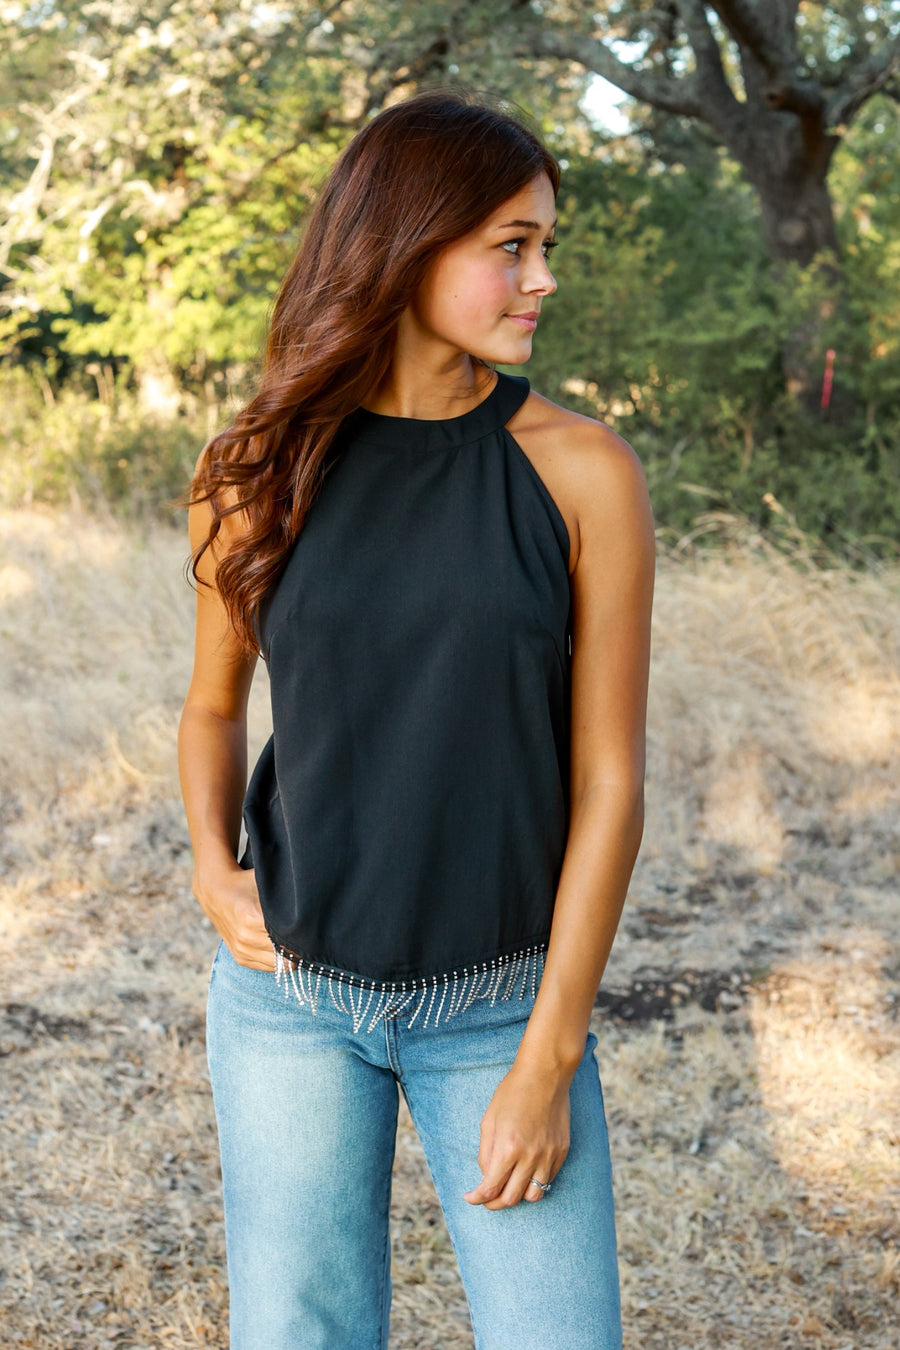 SIMPLY PERFECT BLACK TOP WITH RHINESTONE FRINGE